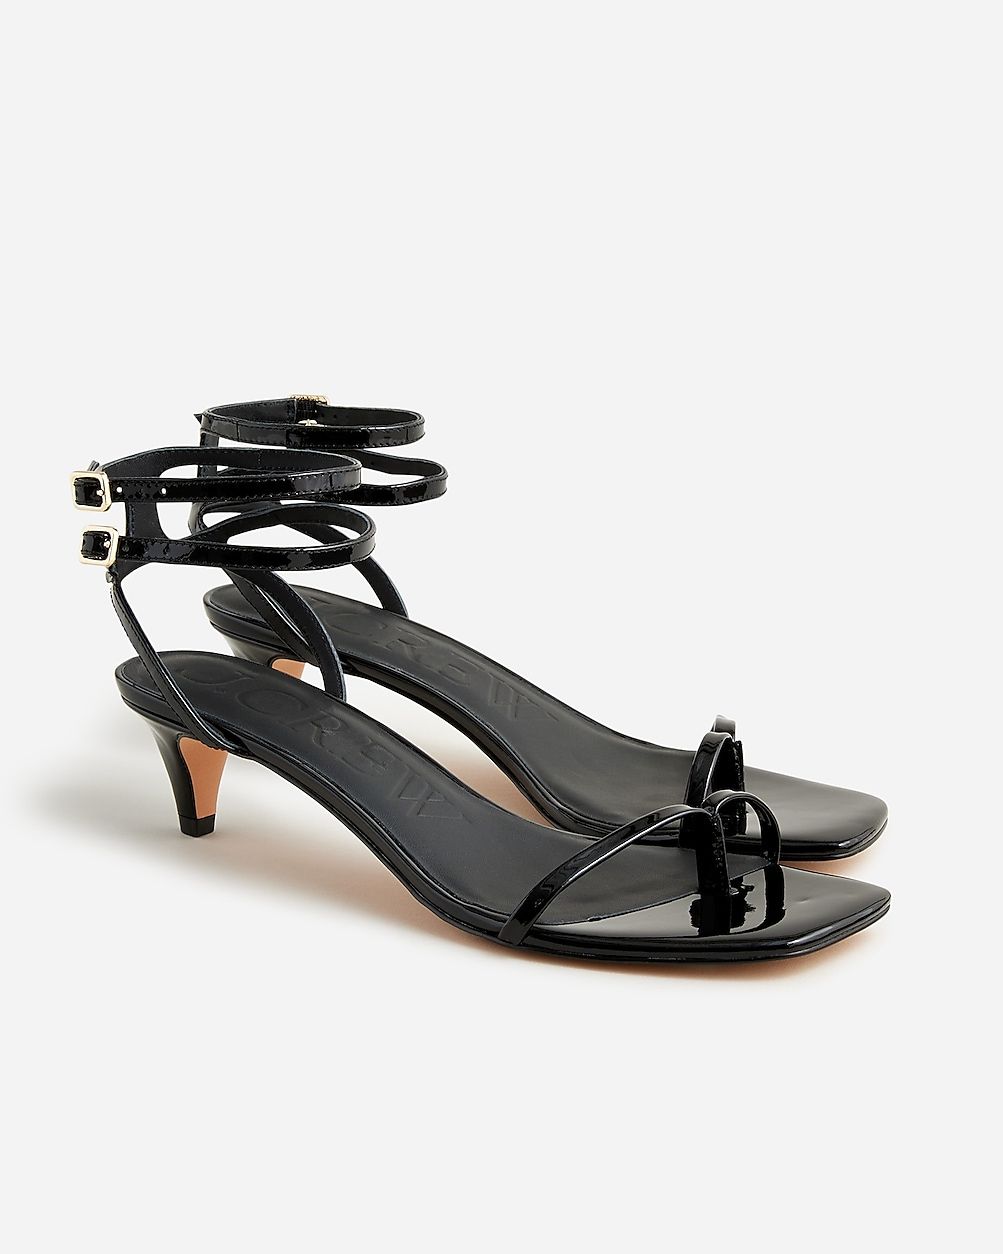 Zadie double ankle-strap heels in leather | J.Crew US